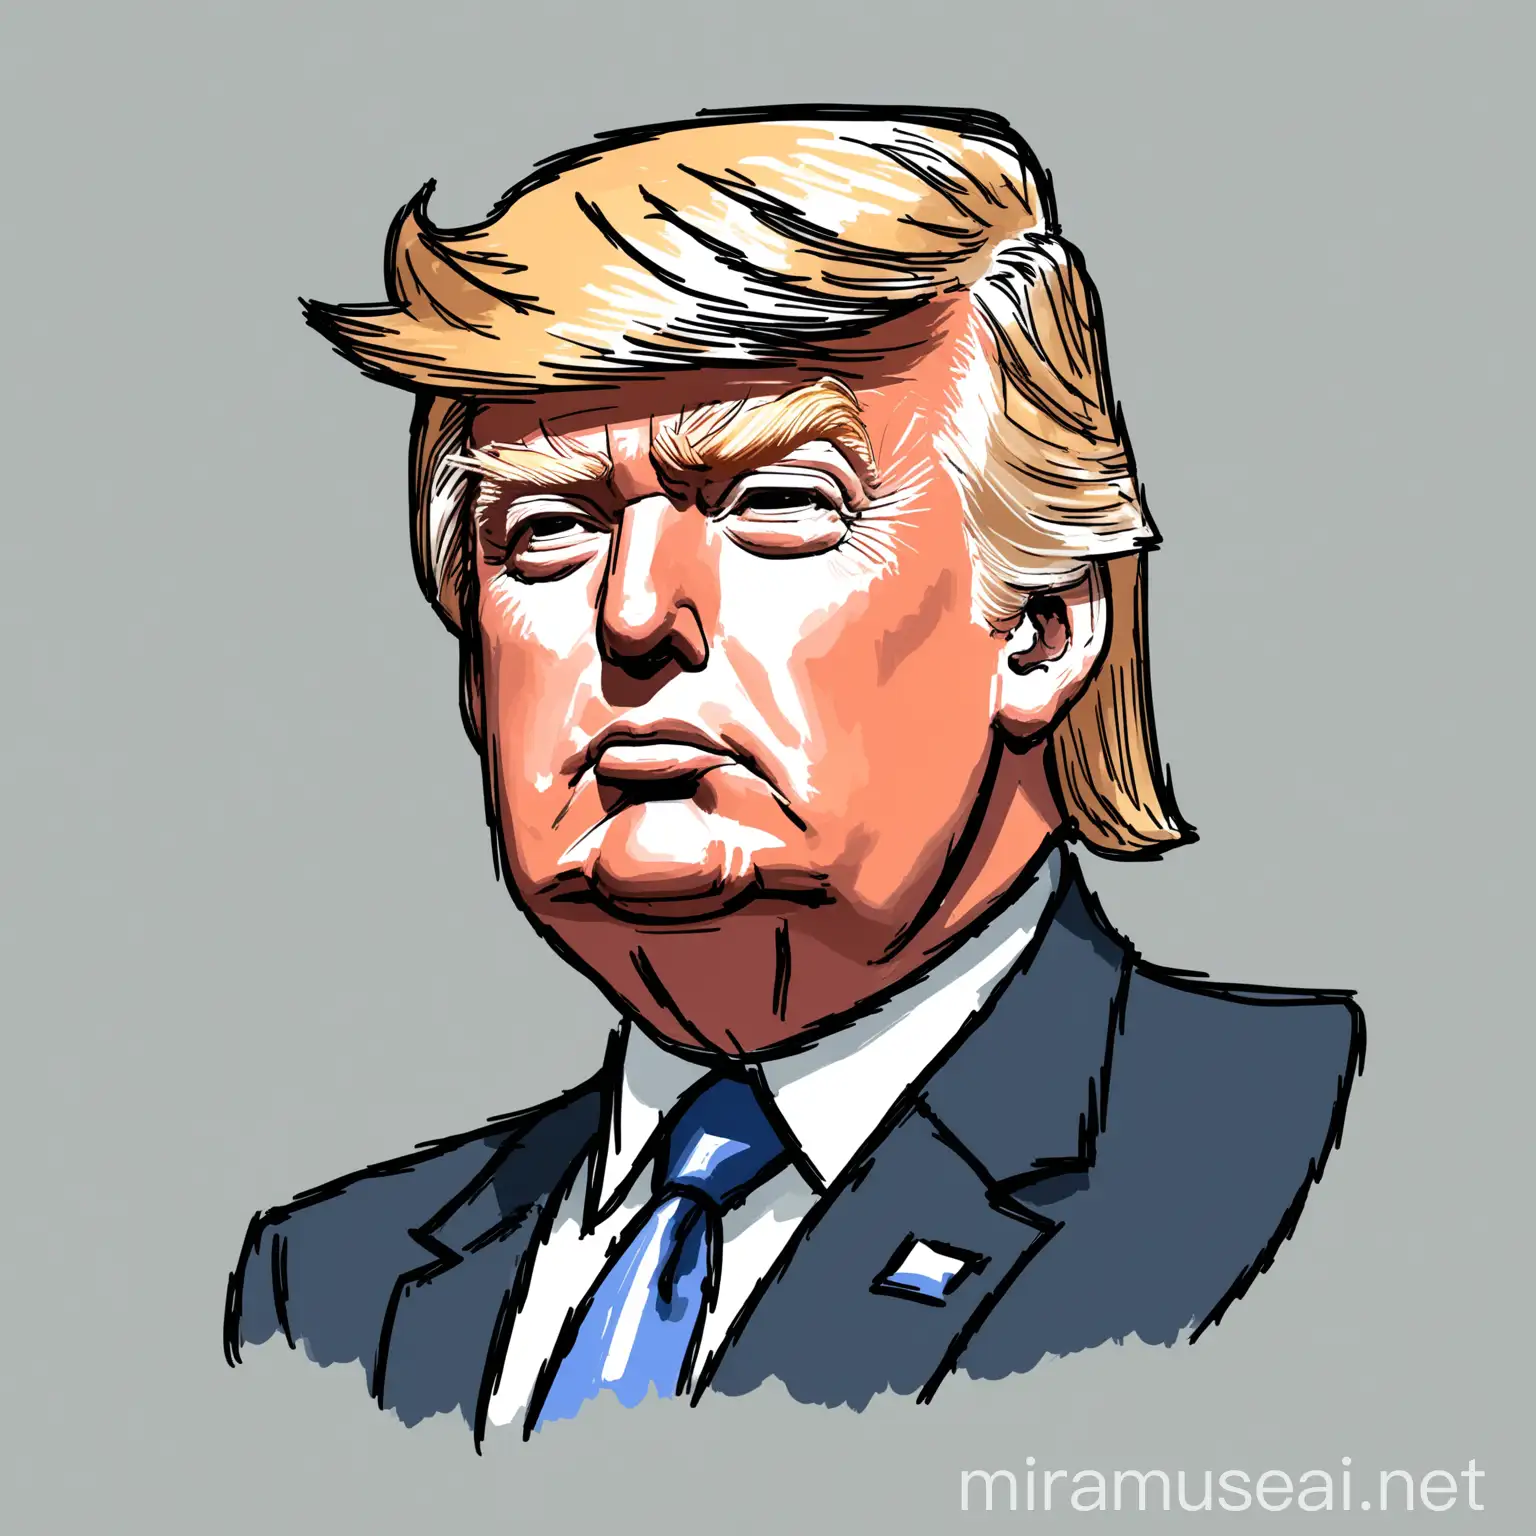 HandDrawn Portrait of Donald Trump in 34 Angle Isolated on Background